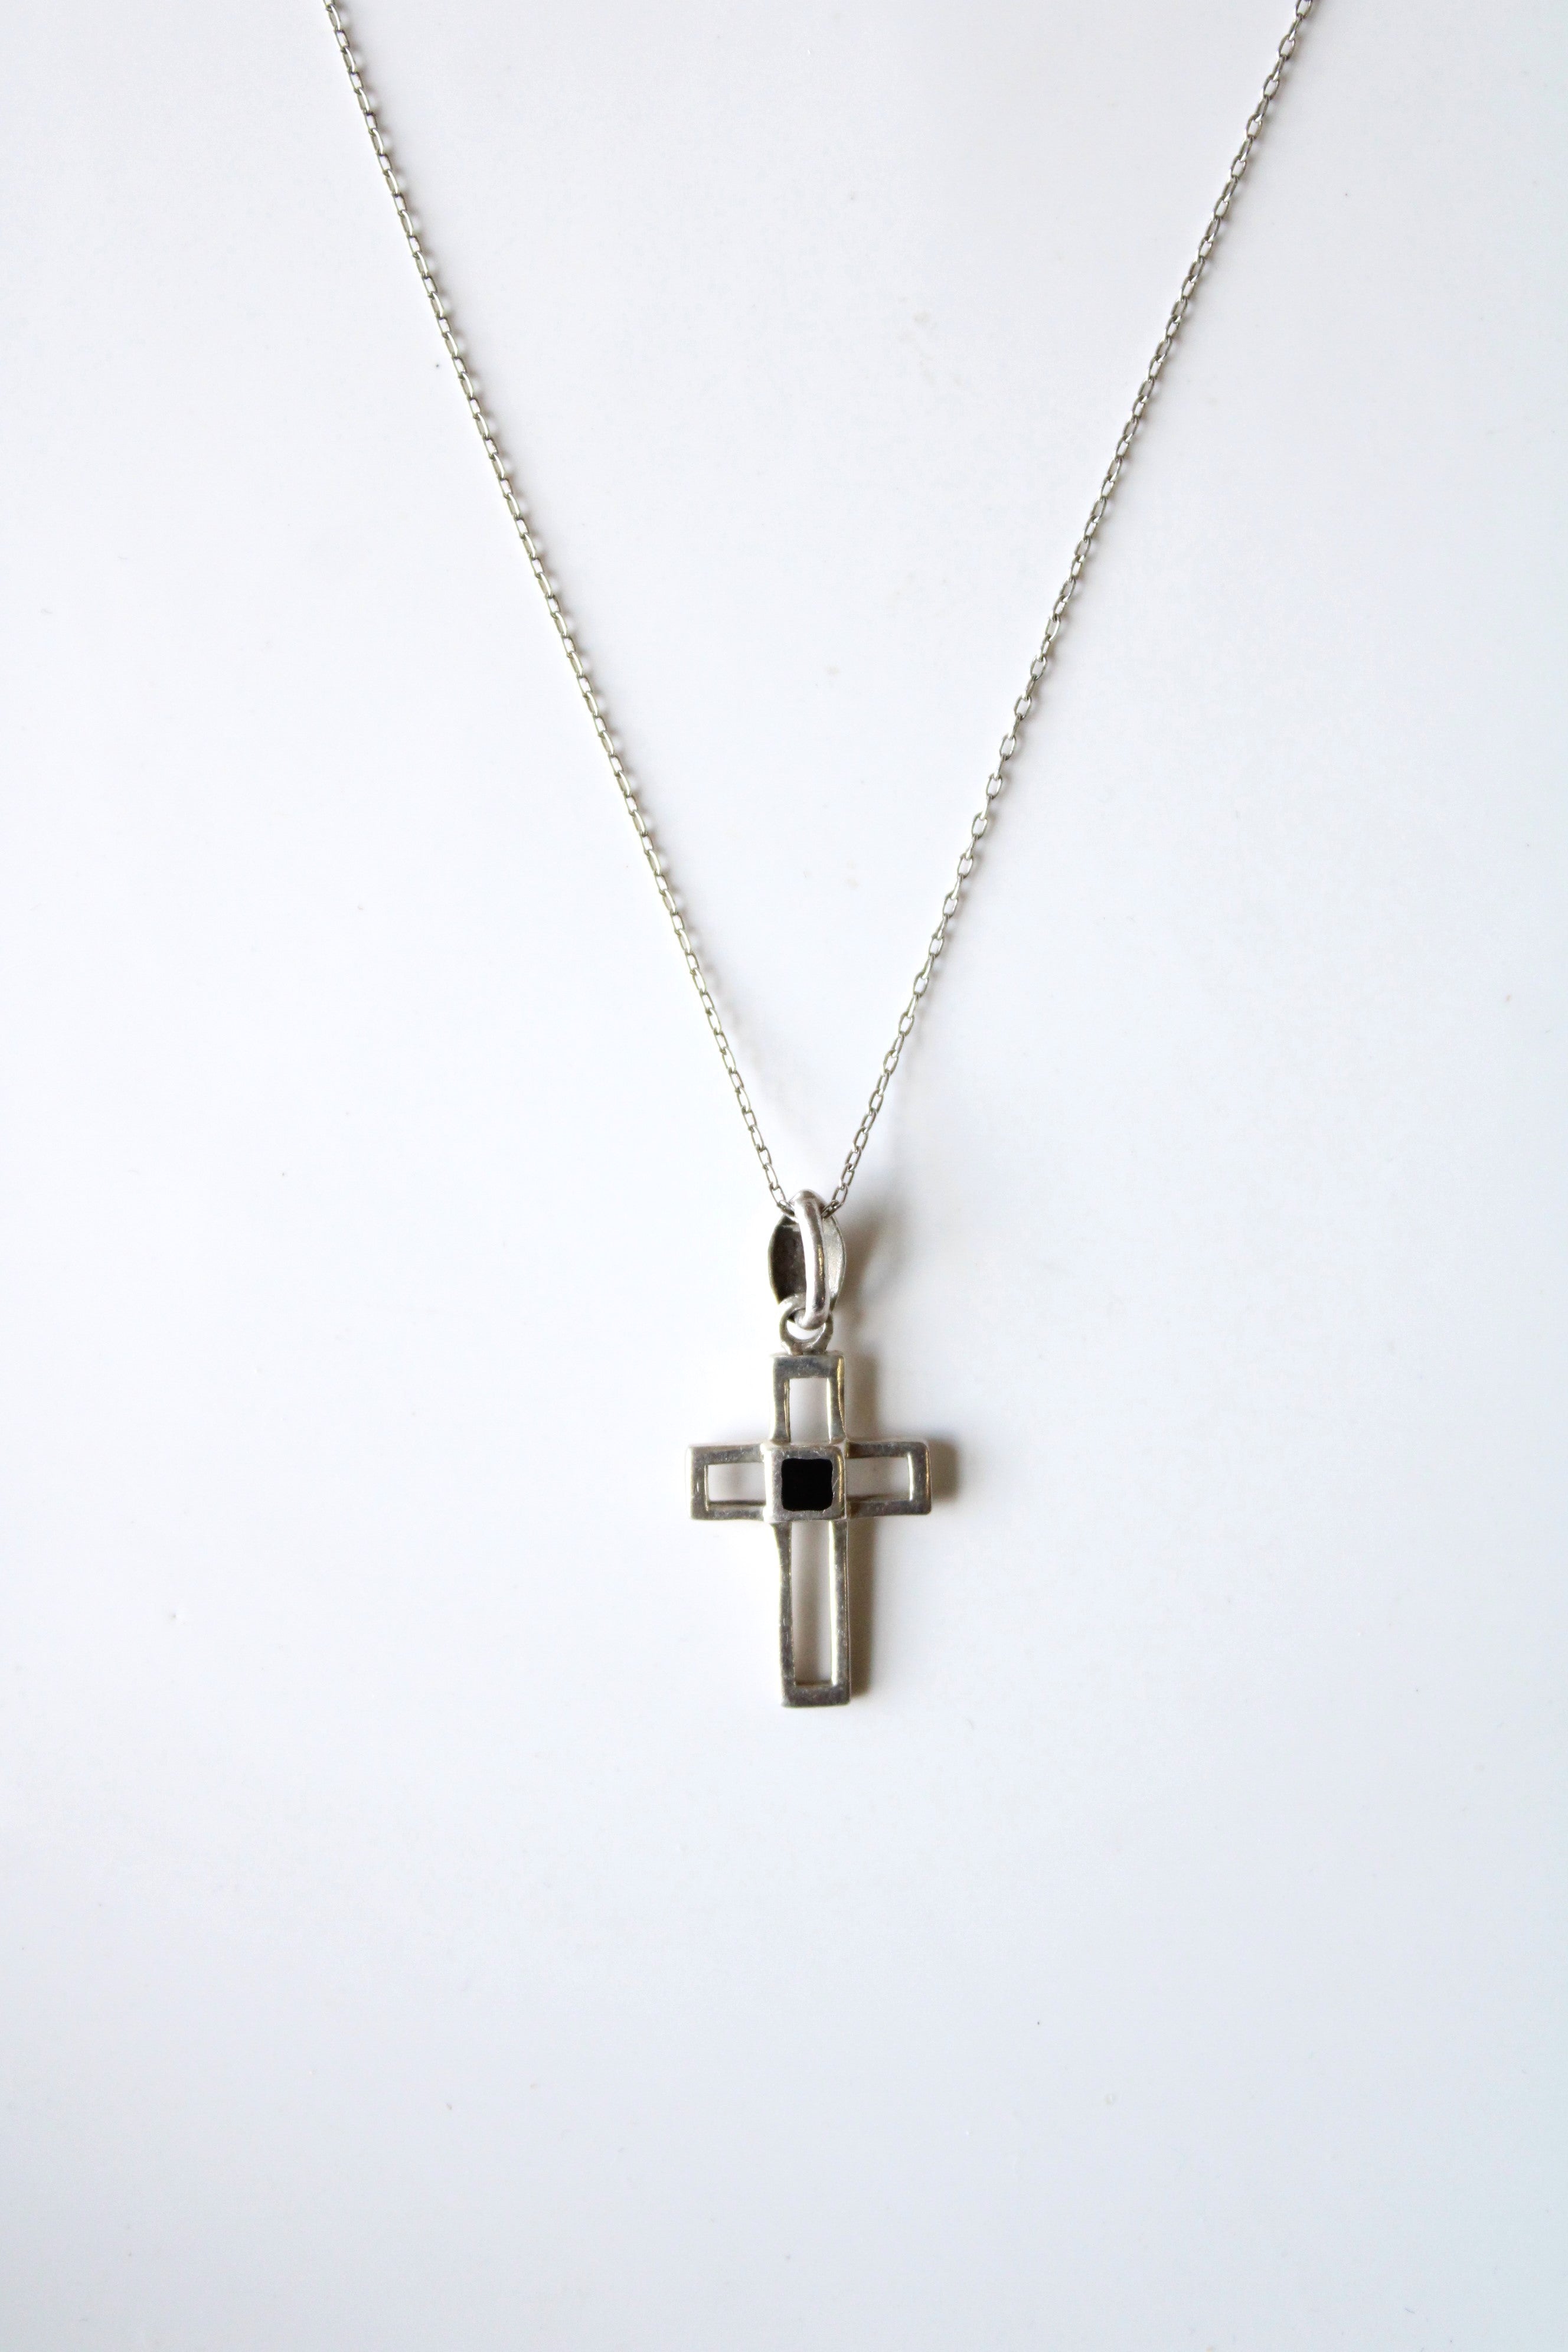 Black Onyx Sterling Silver Hollow Cross Pendant Necklace